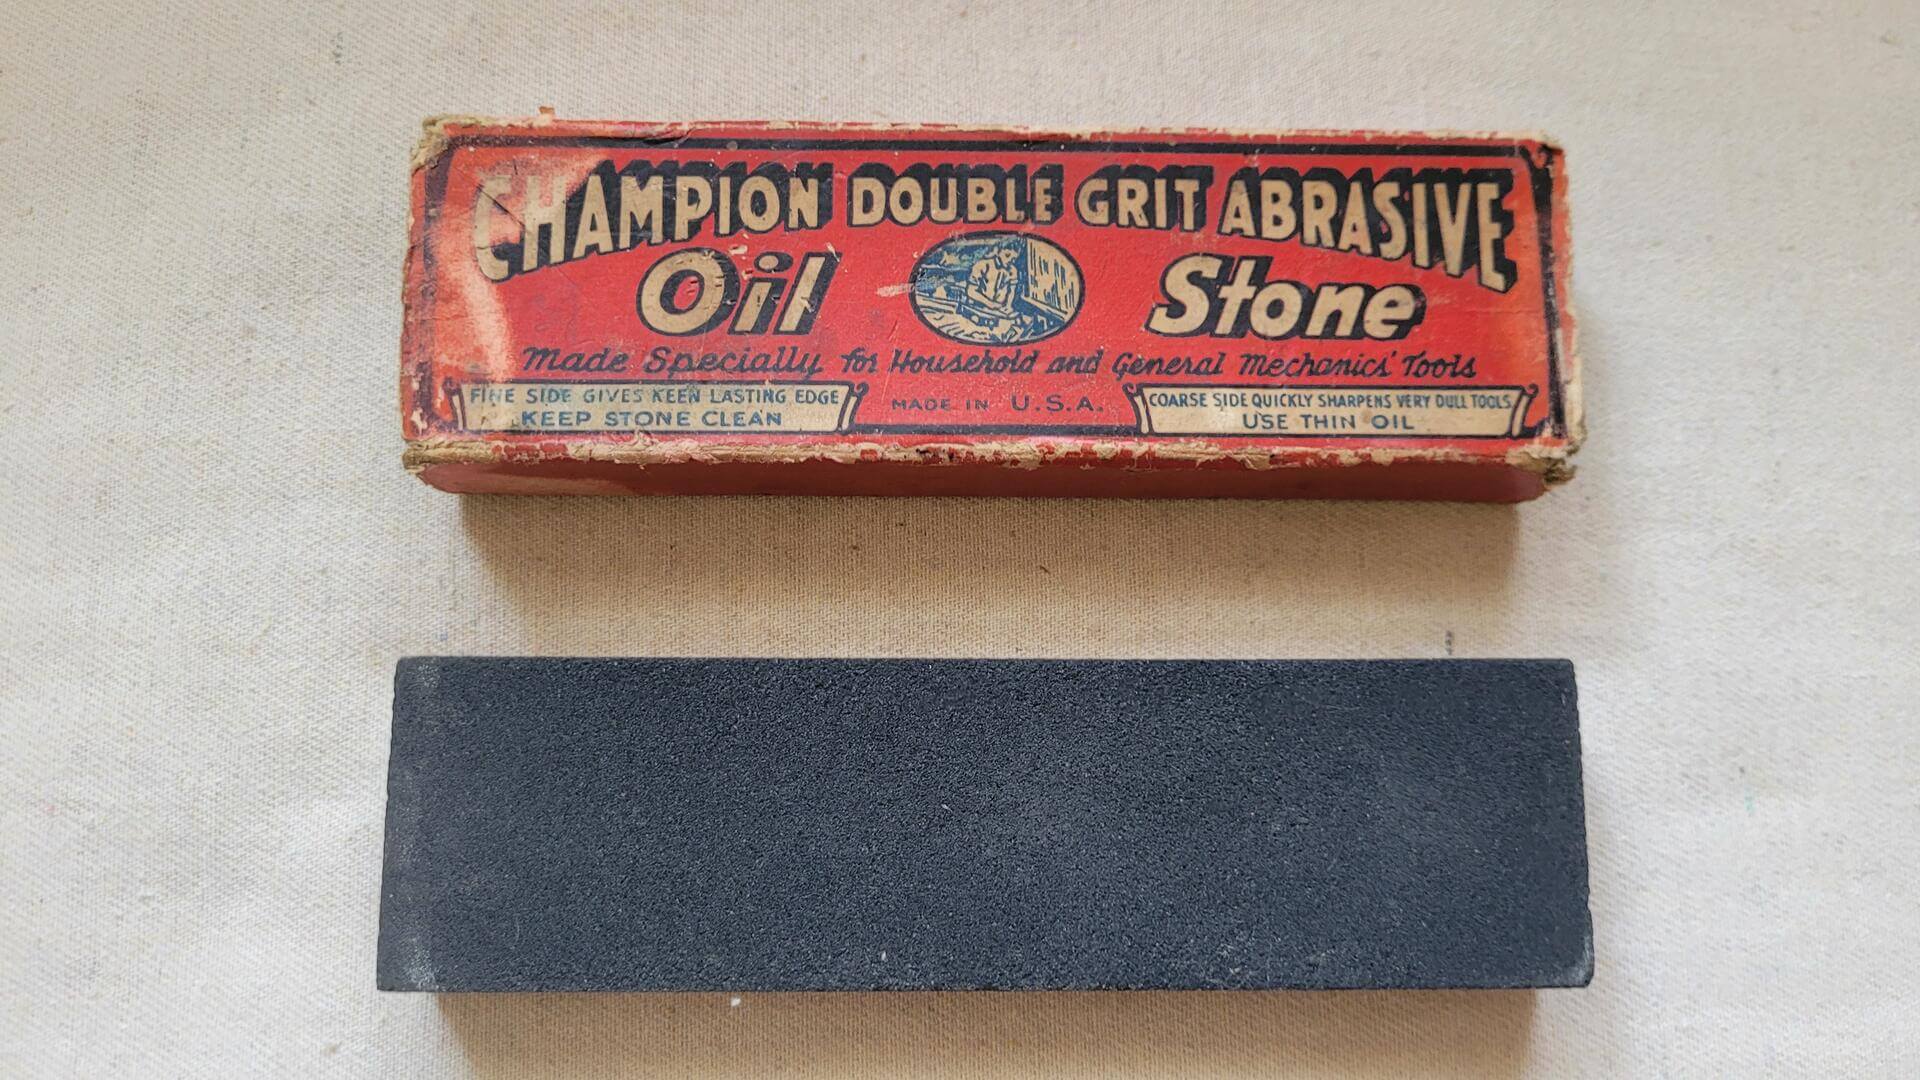 champion-double-grit-abrasive-oil-sharpening-stone-with-box-vinatage-and-antique-made-in-usa-collectible-honing–and-sharpenning-tools